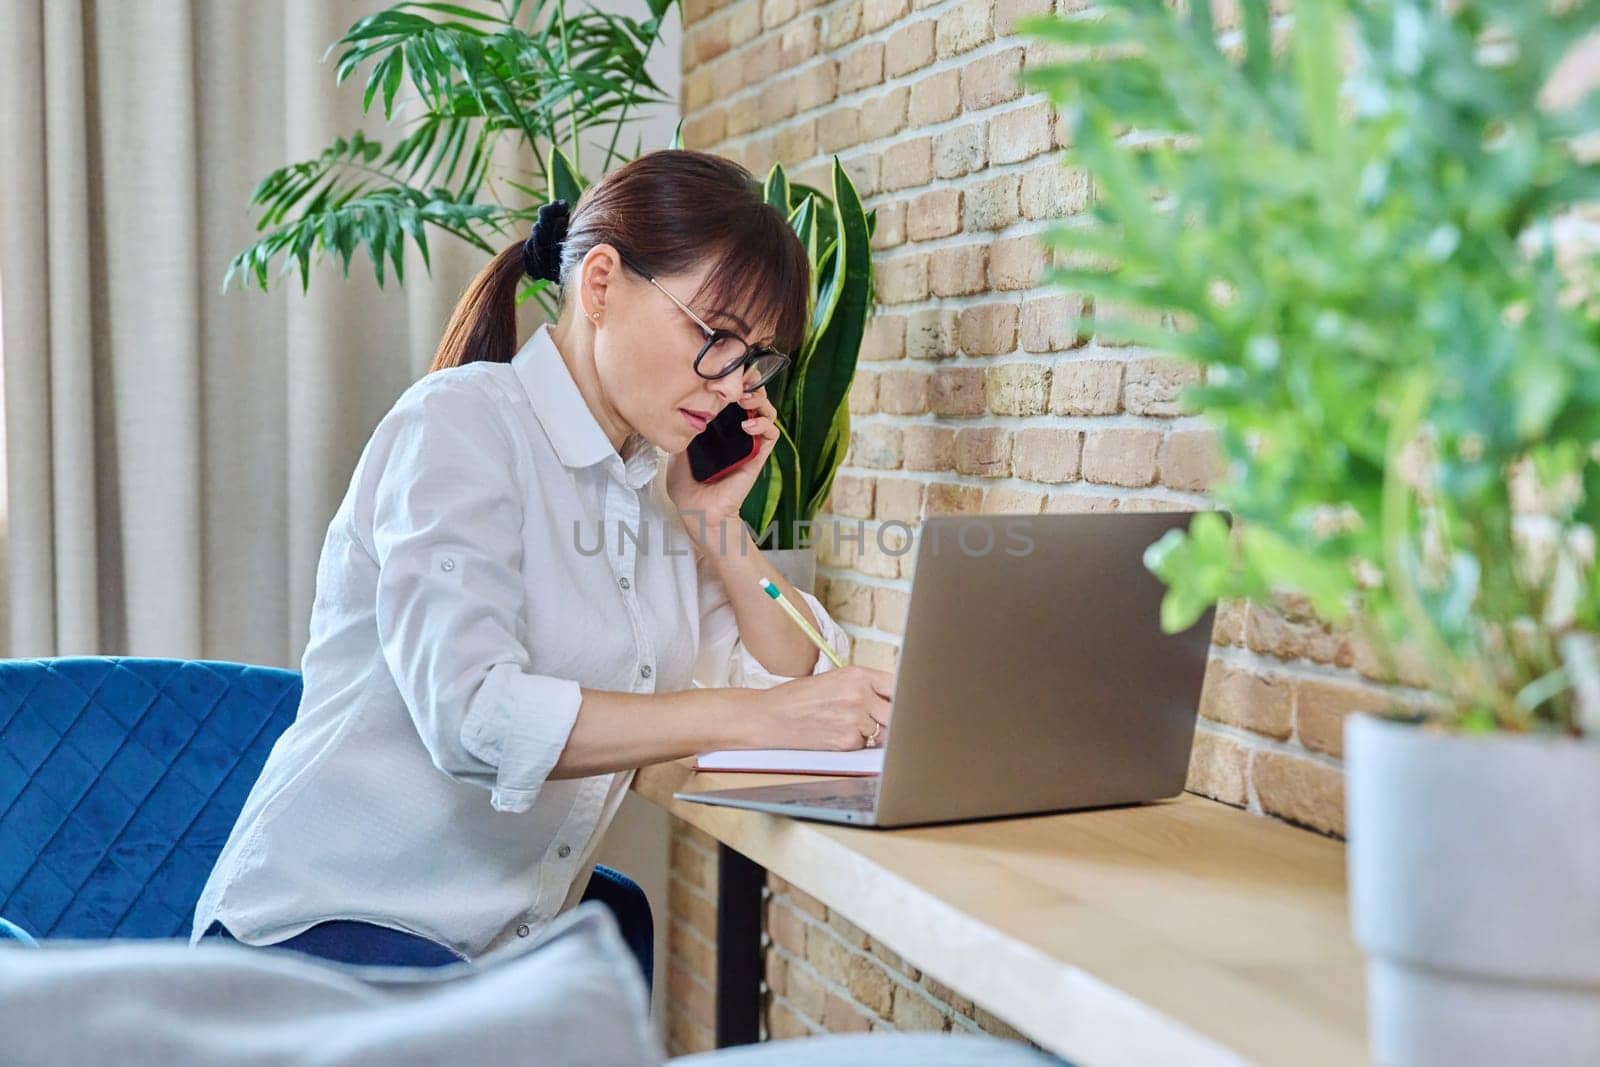 Middle-aged woman talking on mobile phone, sitting at desk at home with laptop computer. Female working remotely, freelancing, online services, technologies for work communication leisure